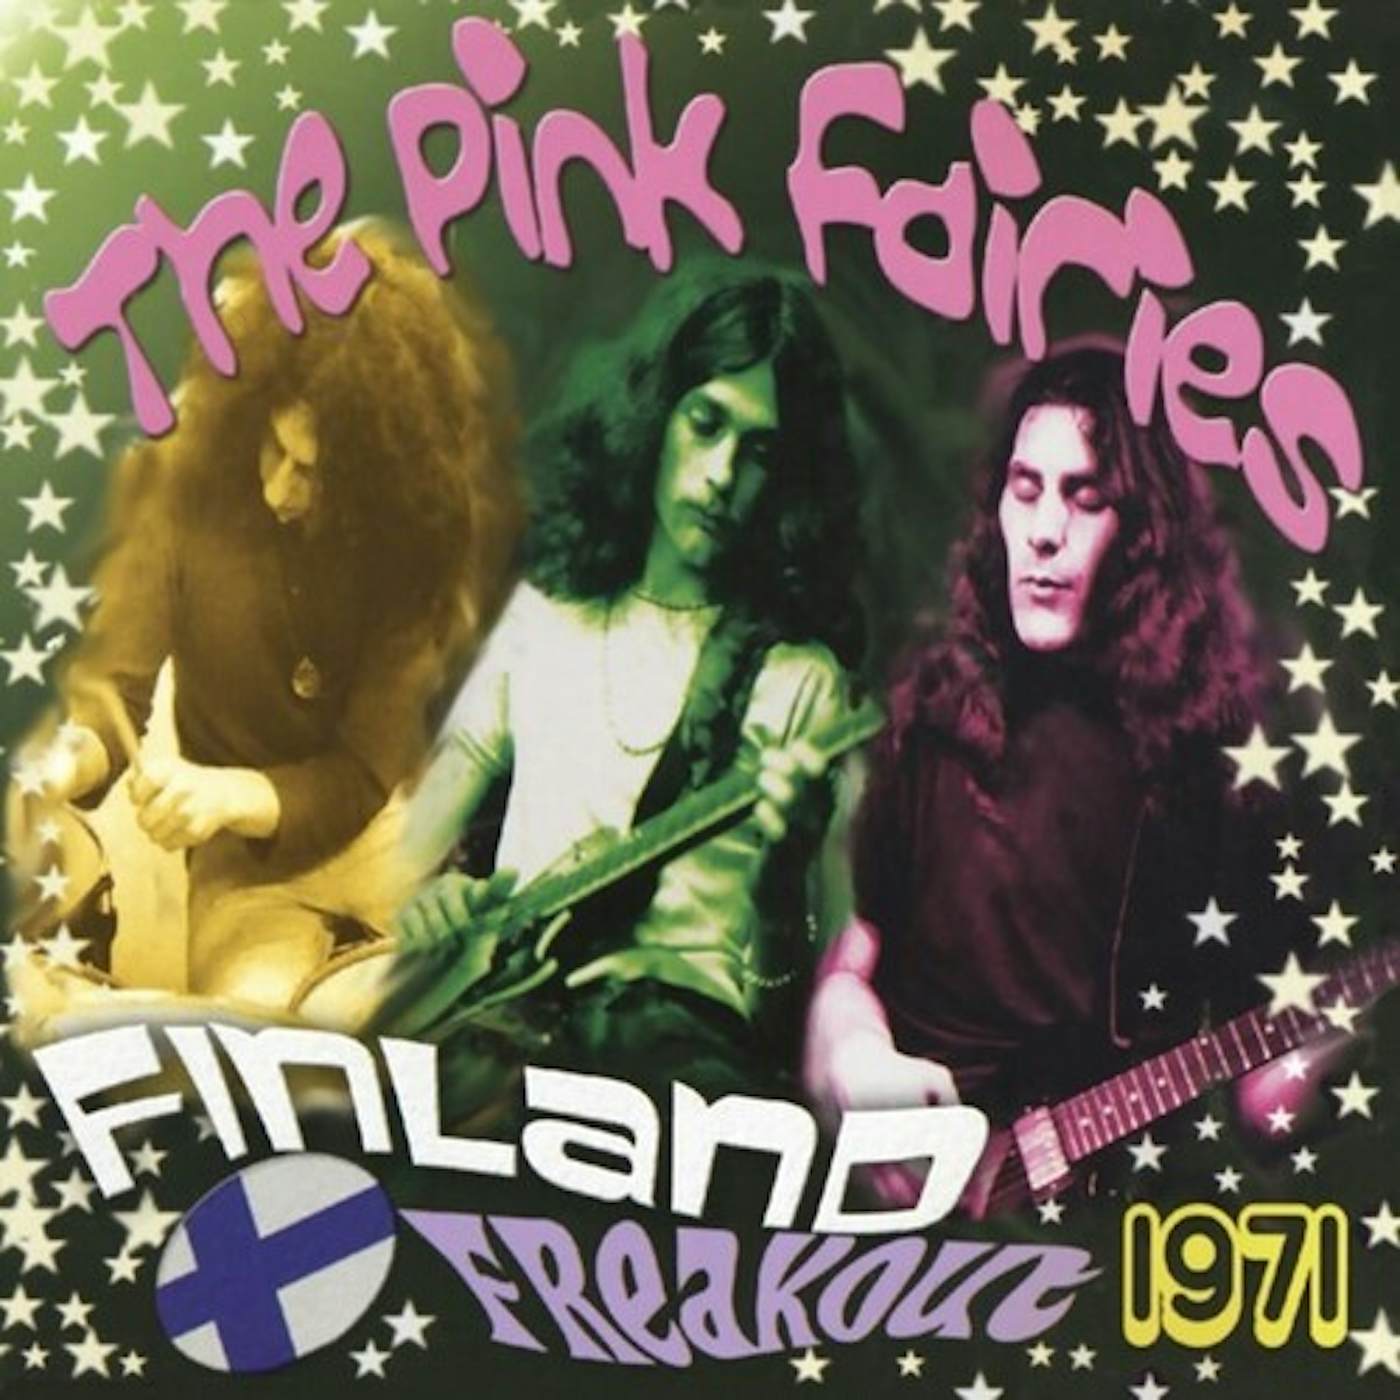 The Pink Fairies Finland Freakout 1971 Vinyl Record